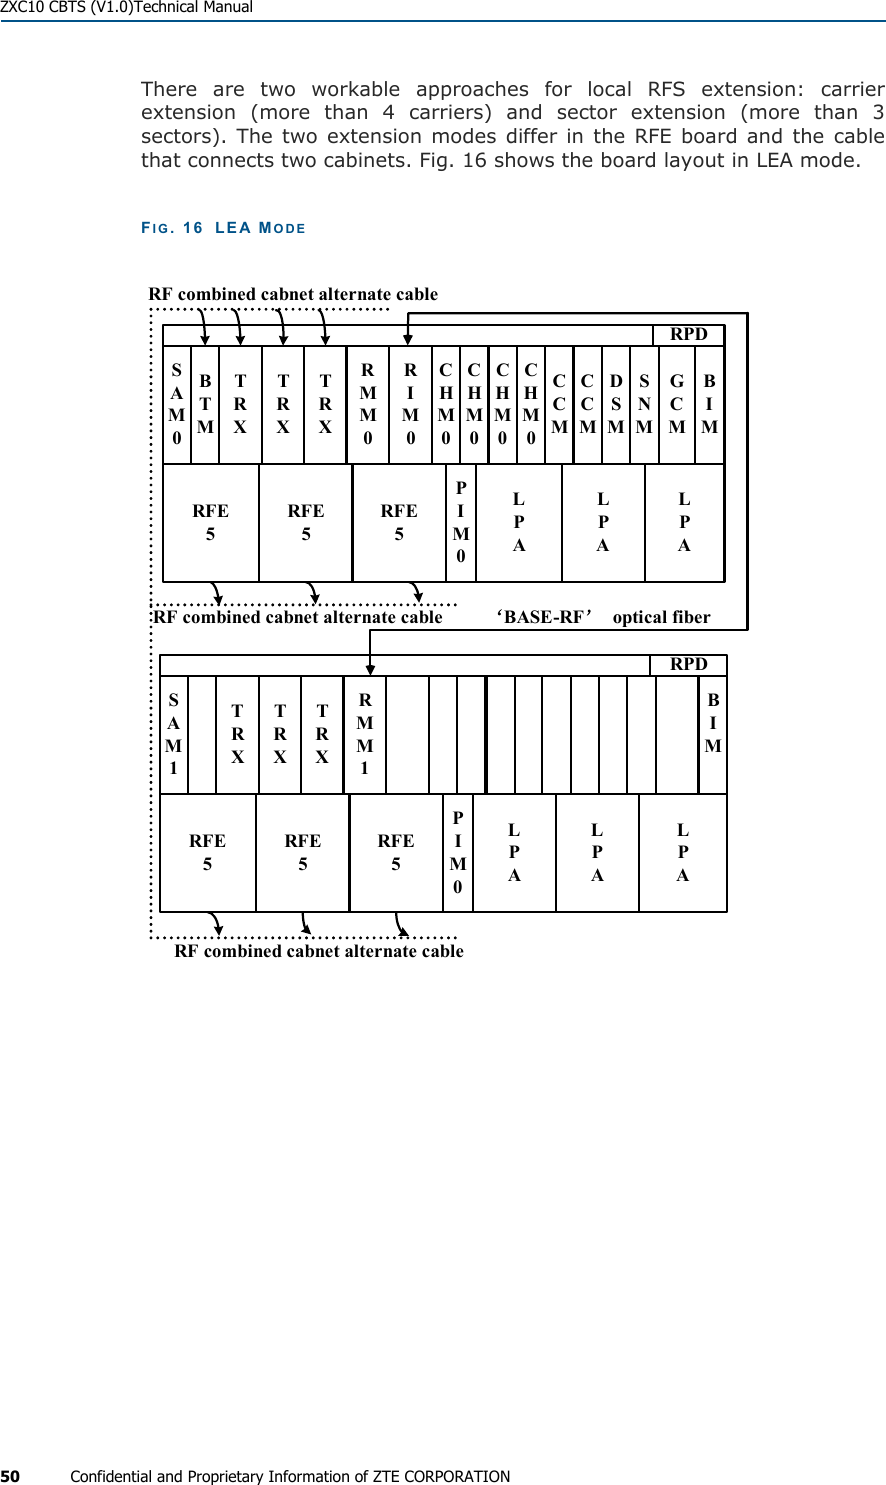  ZXC10 CBTS (V1.0)Technical Manual 50  Confidential and Proprietary Information of ZTE CORPORATION There are two workable approaches for local RFS extension: carrier extension (more than 4 carriers) and sector extension (more than 3 sectors). The two extension modes differ in the RFE board and the cable that connects two cabinets. Fig. 16 shows the board layout in LEA mode.  FIG. 16  LEA MODE CHM0CHM0TRXTRXTRXRMM0RIM0RPDSAM0CCMCCMDSMGCMLPAPIM0LPALPASNMBTMTRXTRXTRXRMM1RPDSAM1LPAPIM0LPALPACHM0CHM0RFE5RFE5RFE5RFE5RFE5RFE5‘BASE-RF’optical fiberRF combined cabnet alternate cableRF combined cabnet alternate cableRF combined cabnet alternate cableBIMBIM 